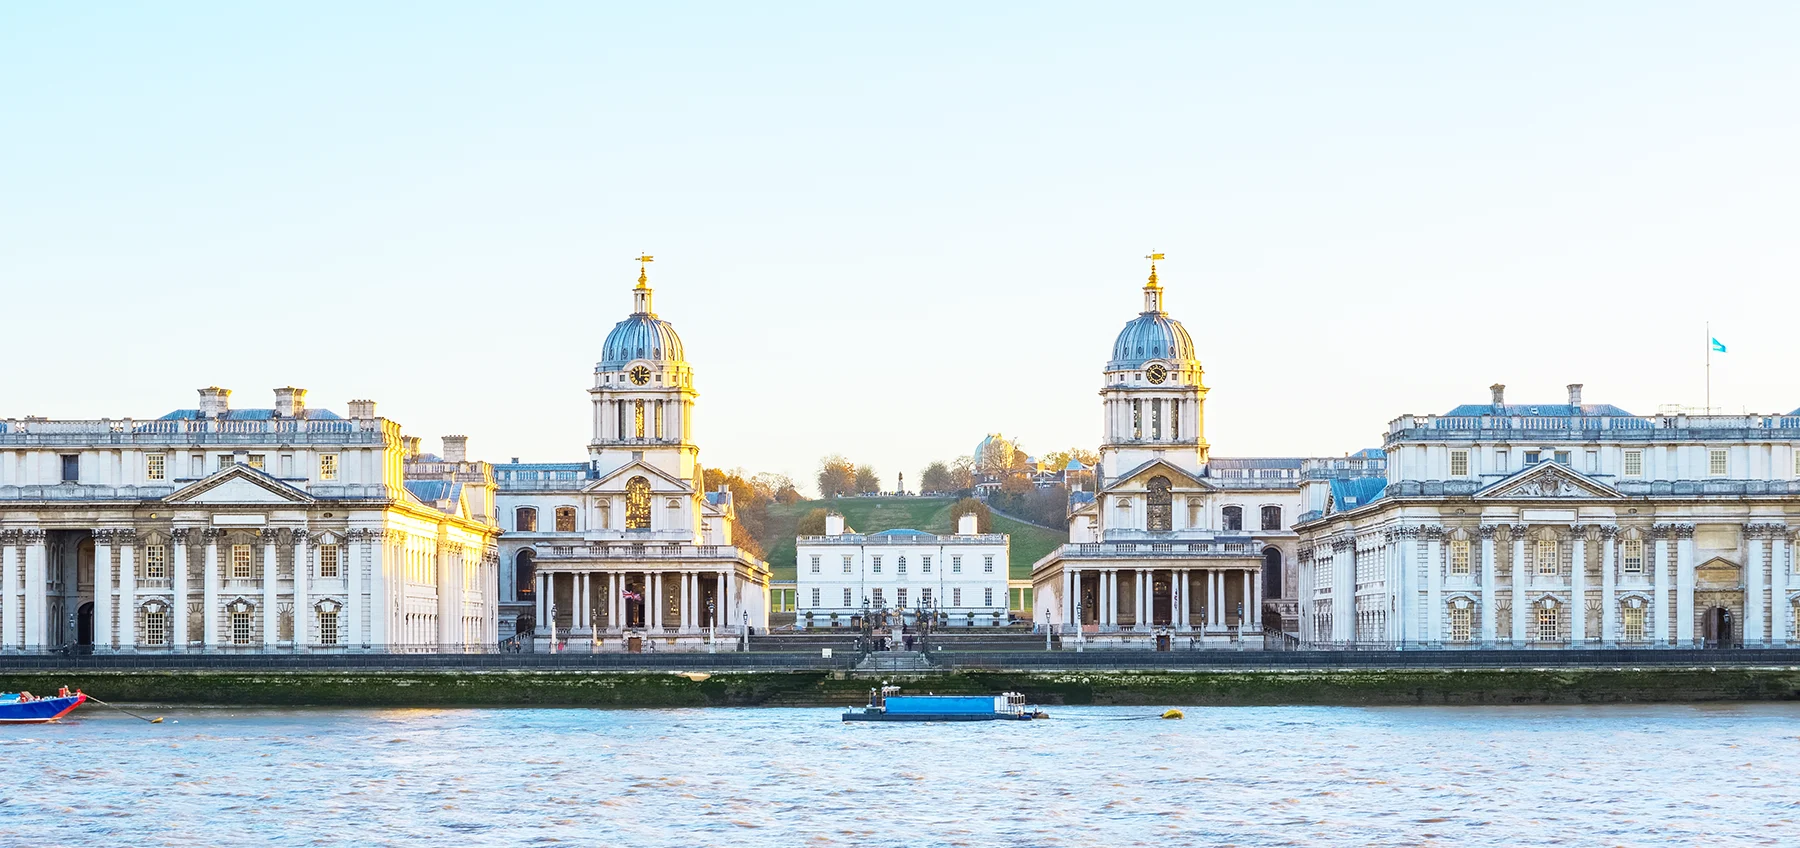 The River Thames at Greenwich with large white historic buildings on the riverside.